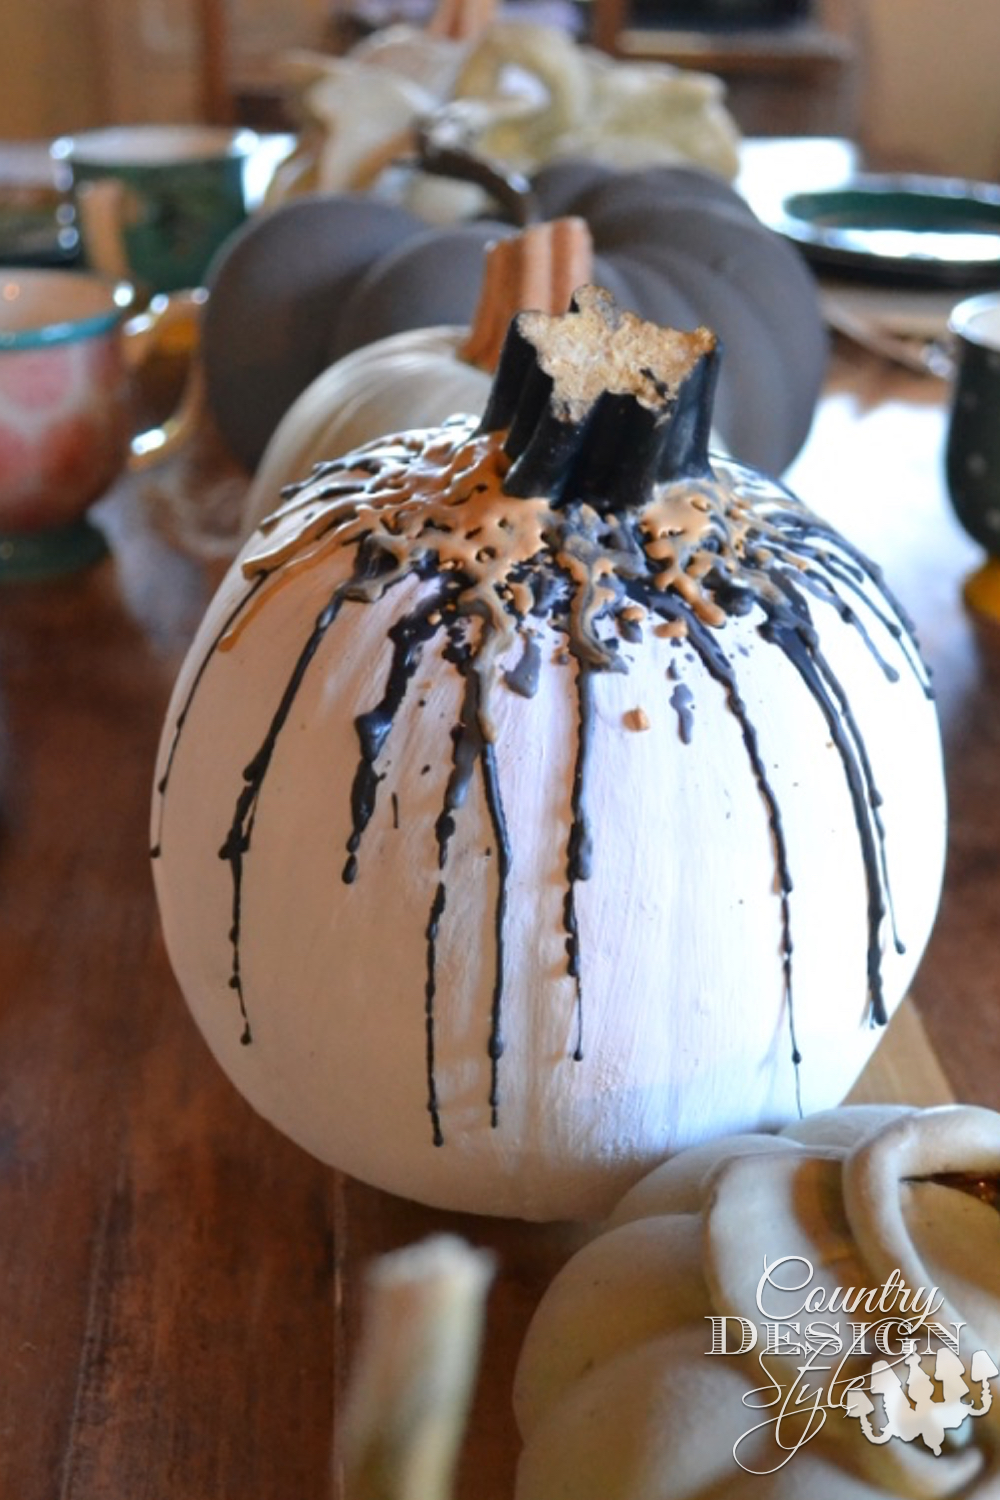 Pumpkin with melted crayon in fall colors to display on Thanksgiving table. | countrydesignstyle.com